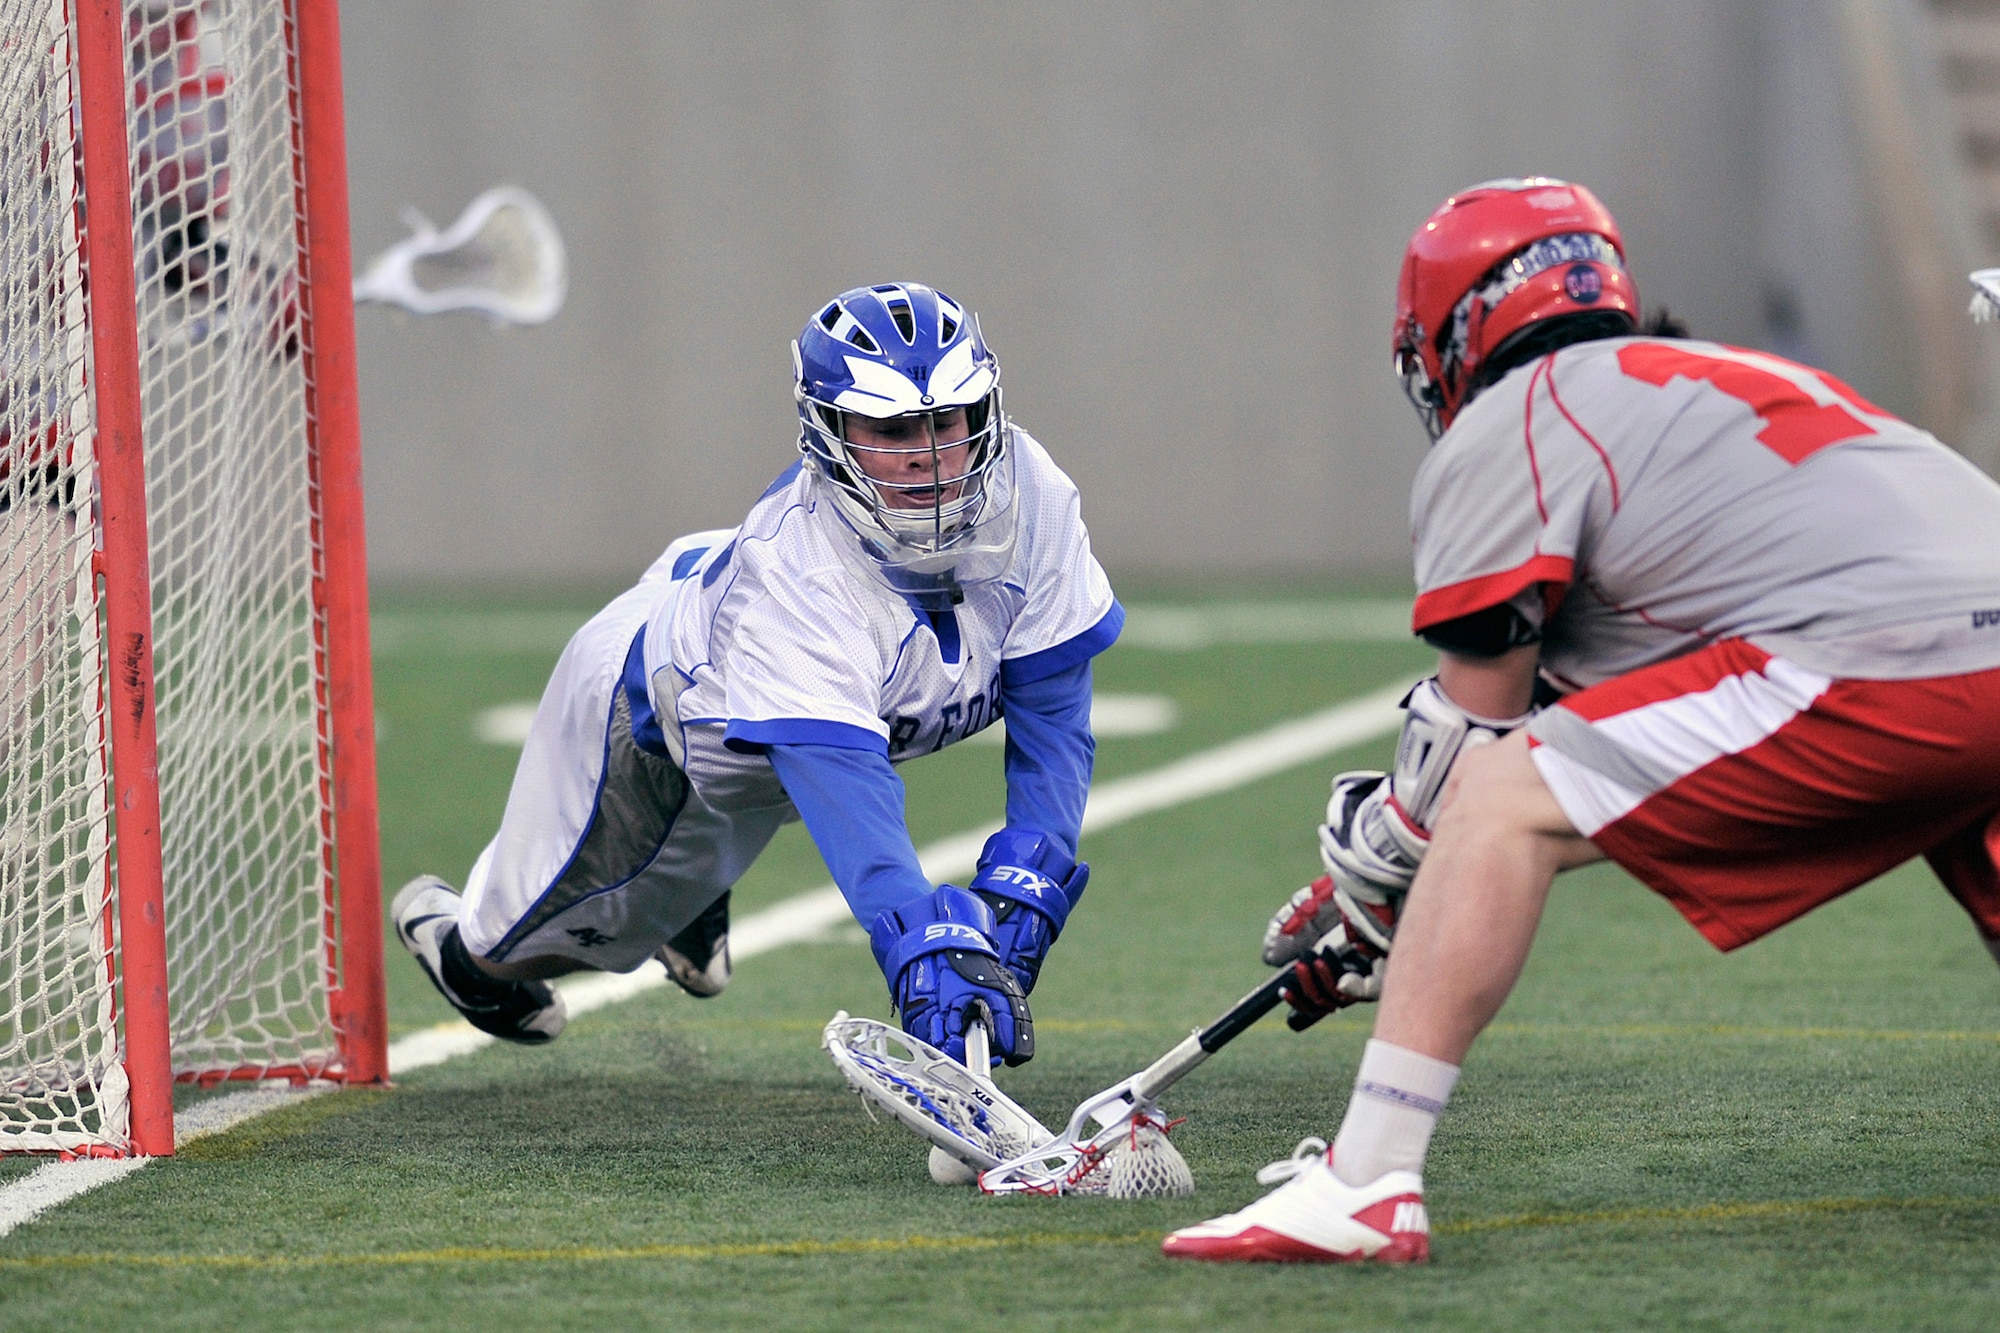 Falcons senior goalkeeper Brian Wilson makes a stop during first-period action against the Ohio State Buckeyes April 17, 2011, at Falcon Stadium in Colorado Springs, Colo. (U.S. Air Force photo/Ray McCoy)